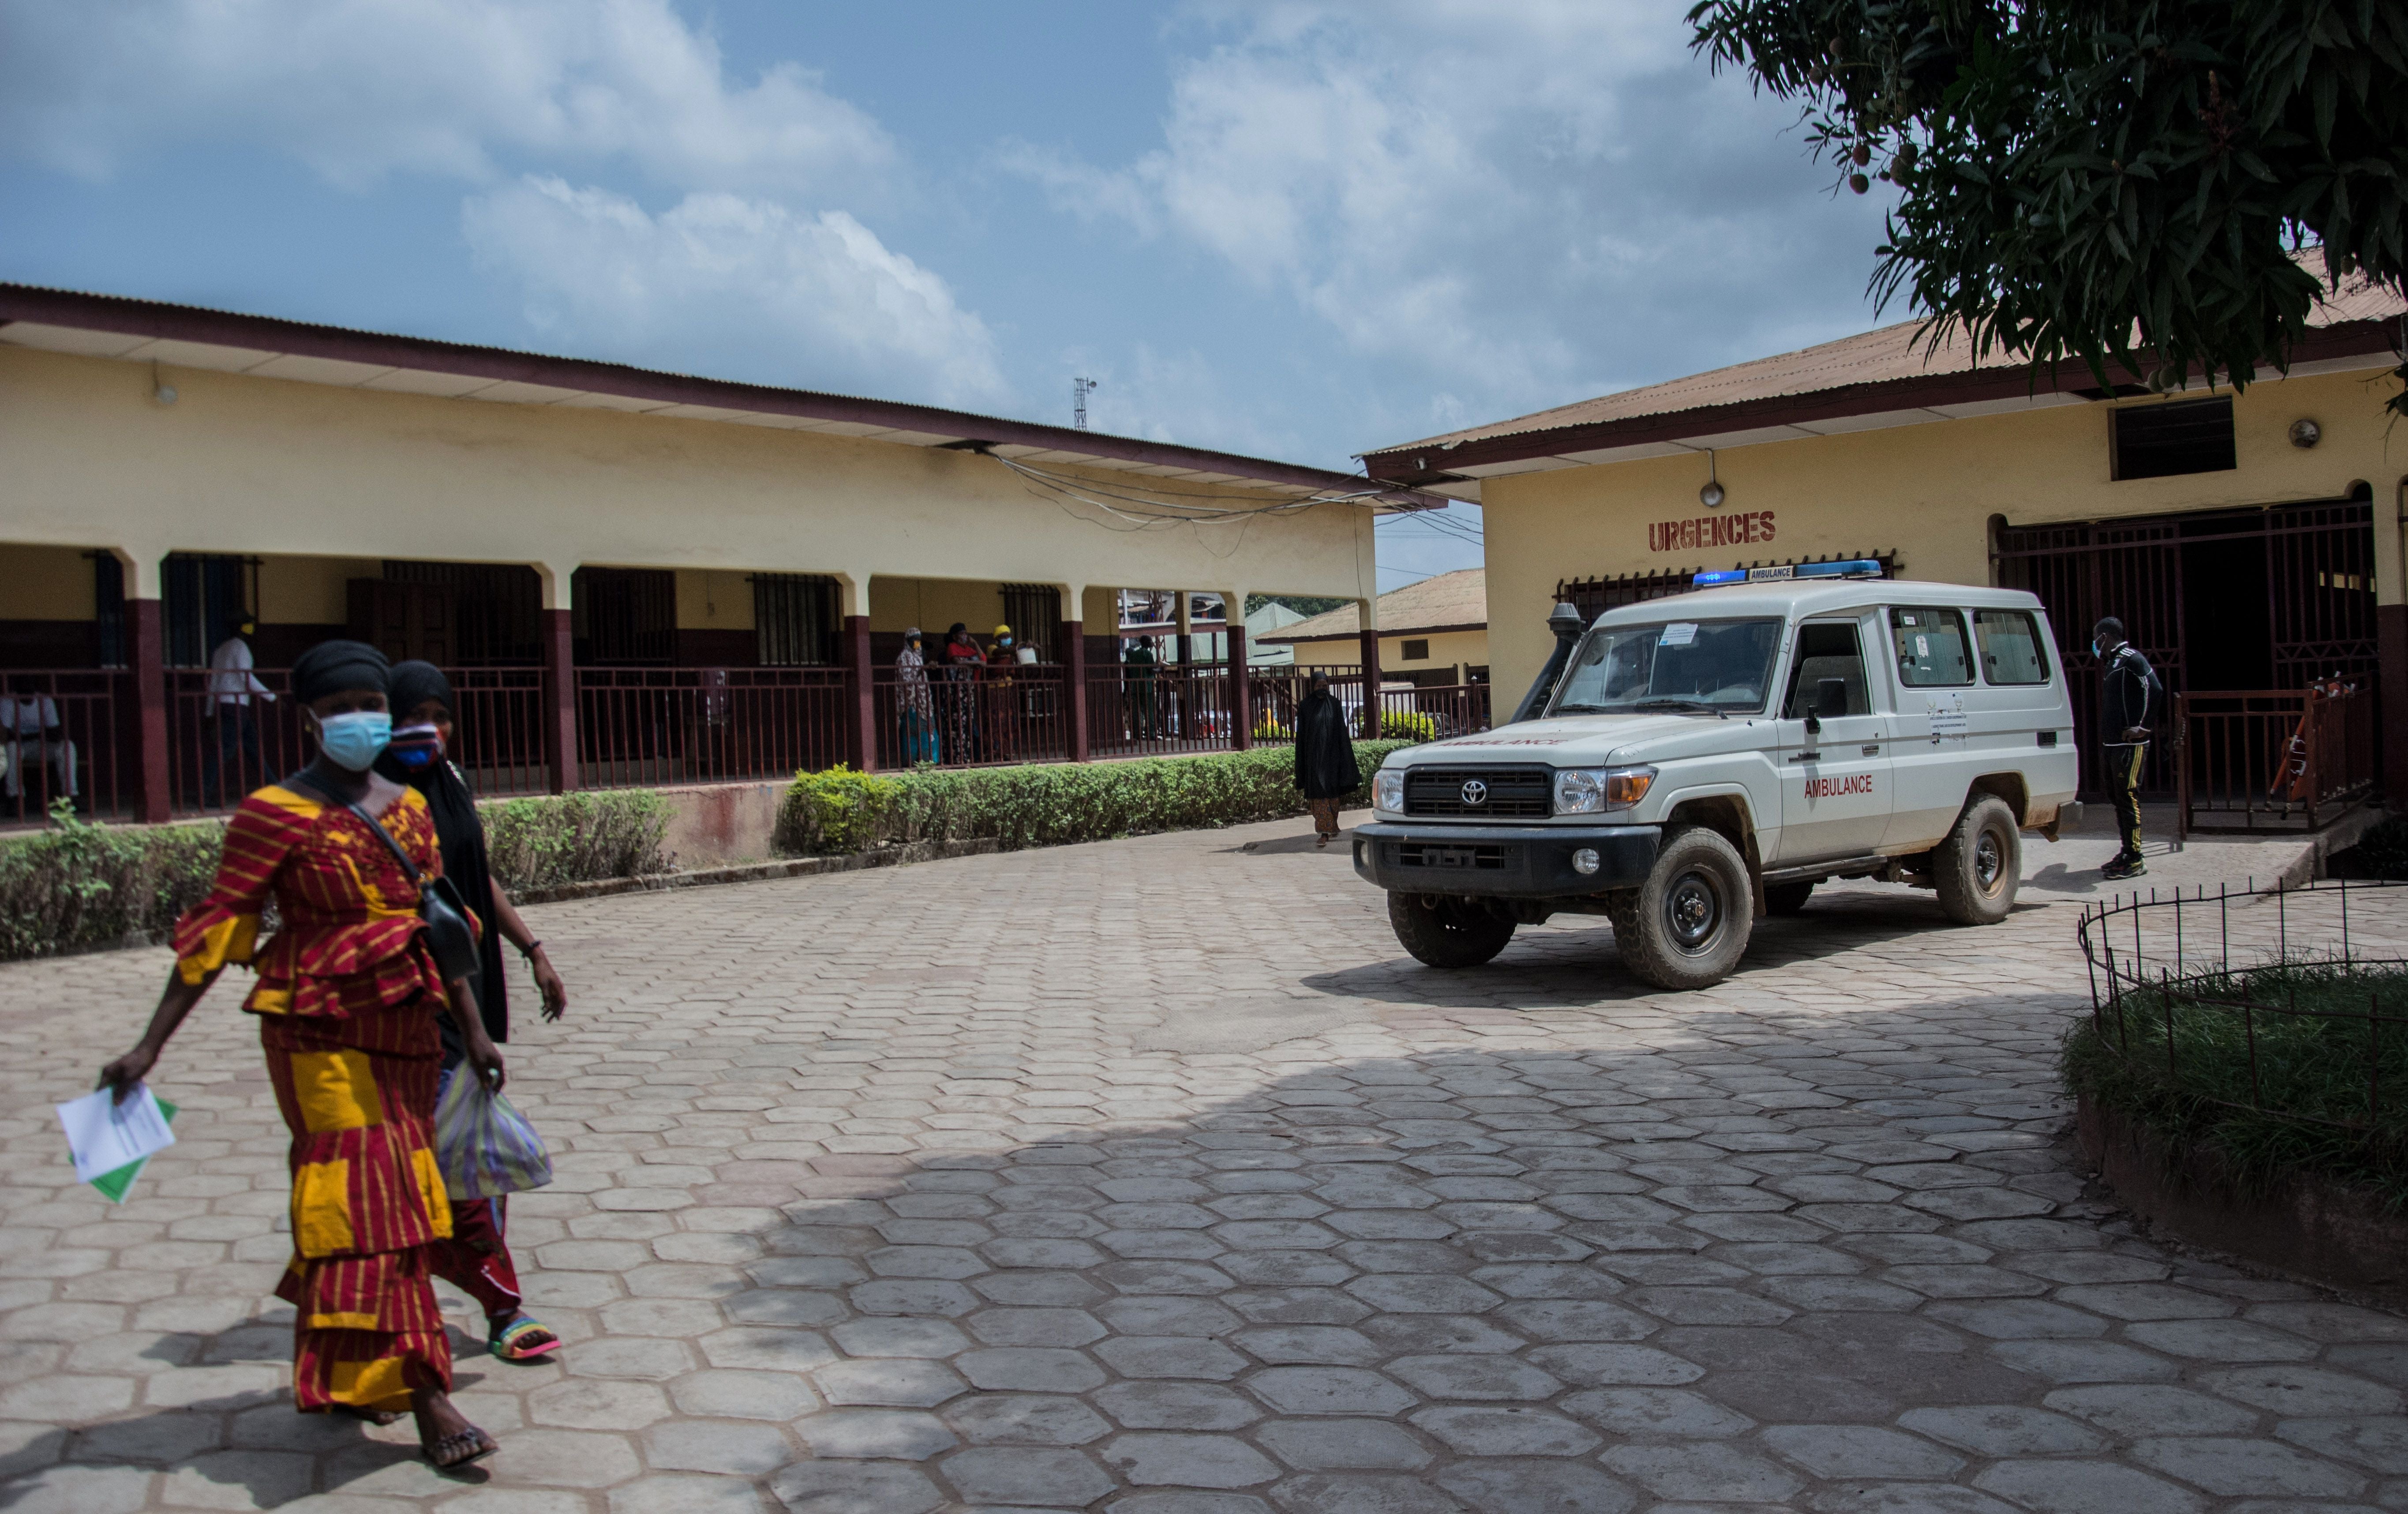 Two women walk through the emergency drop-off area at the N’zerekore Hospital where the first cases of Ebola were found at the end of January 2021